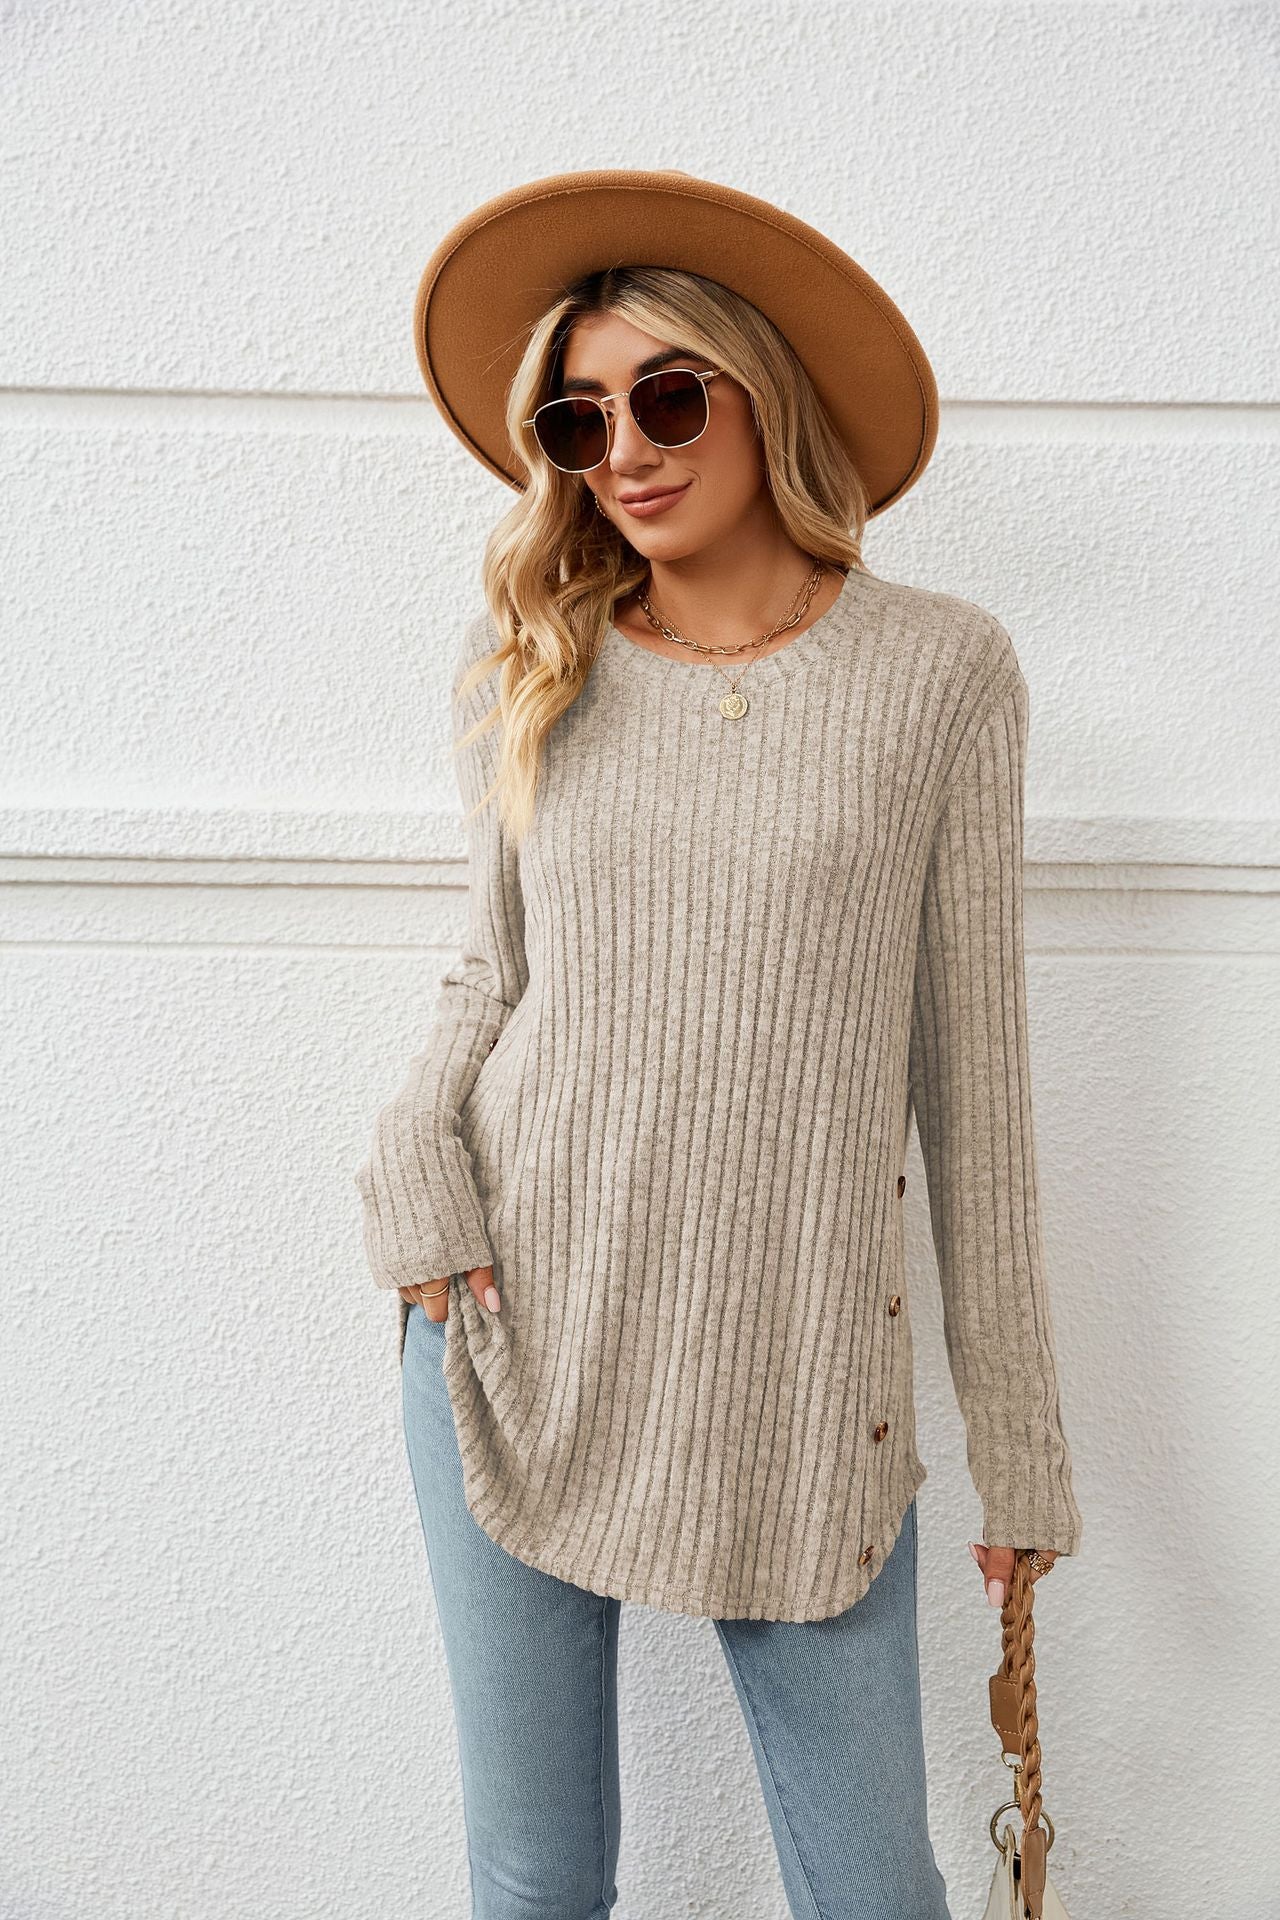 Autumn And Winter New Round Neck Long Sleeve Loose Button T-shirt Top For Women